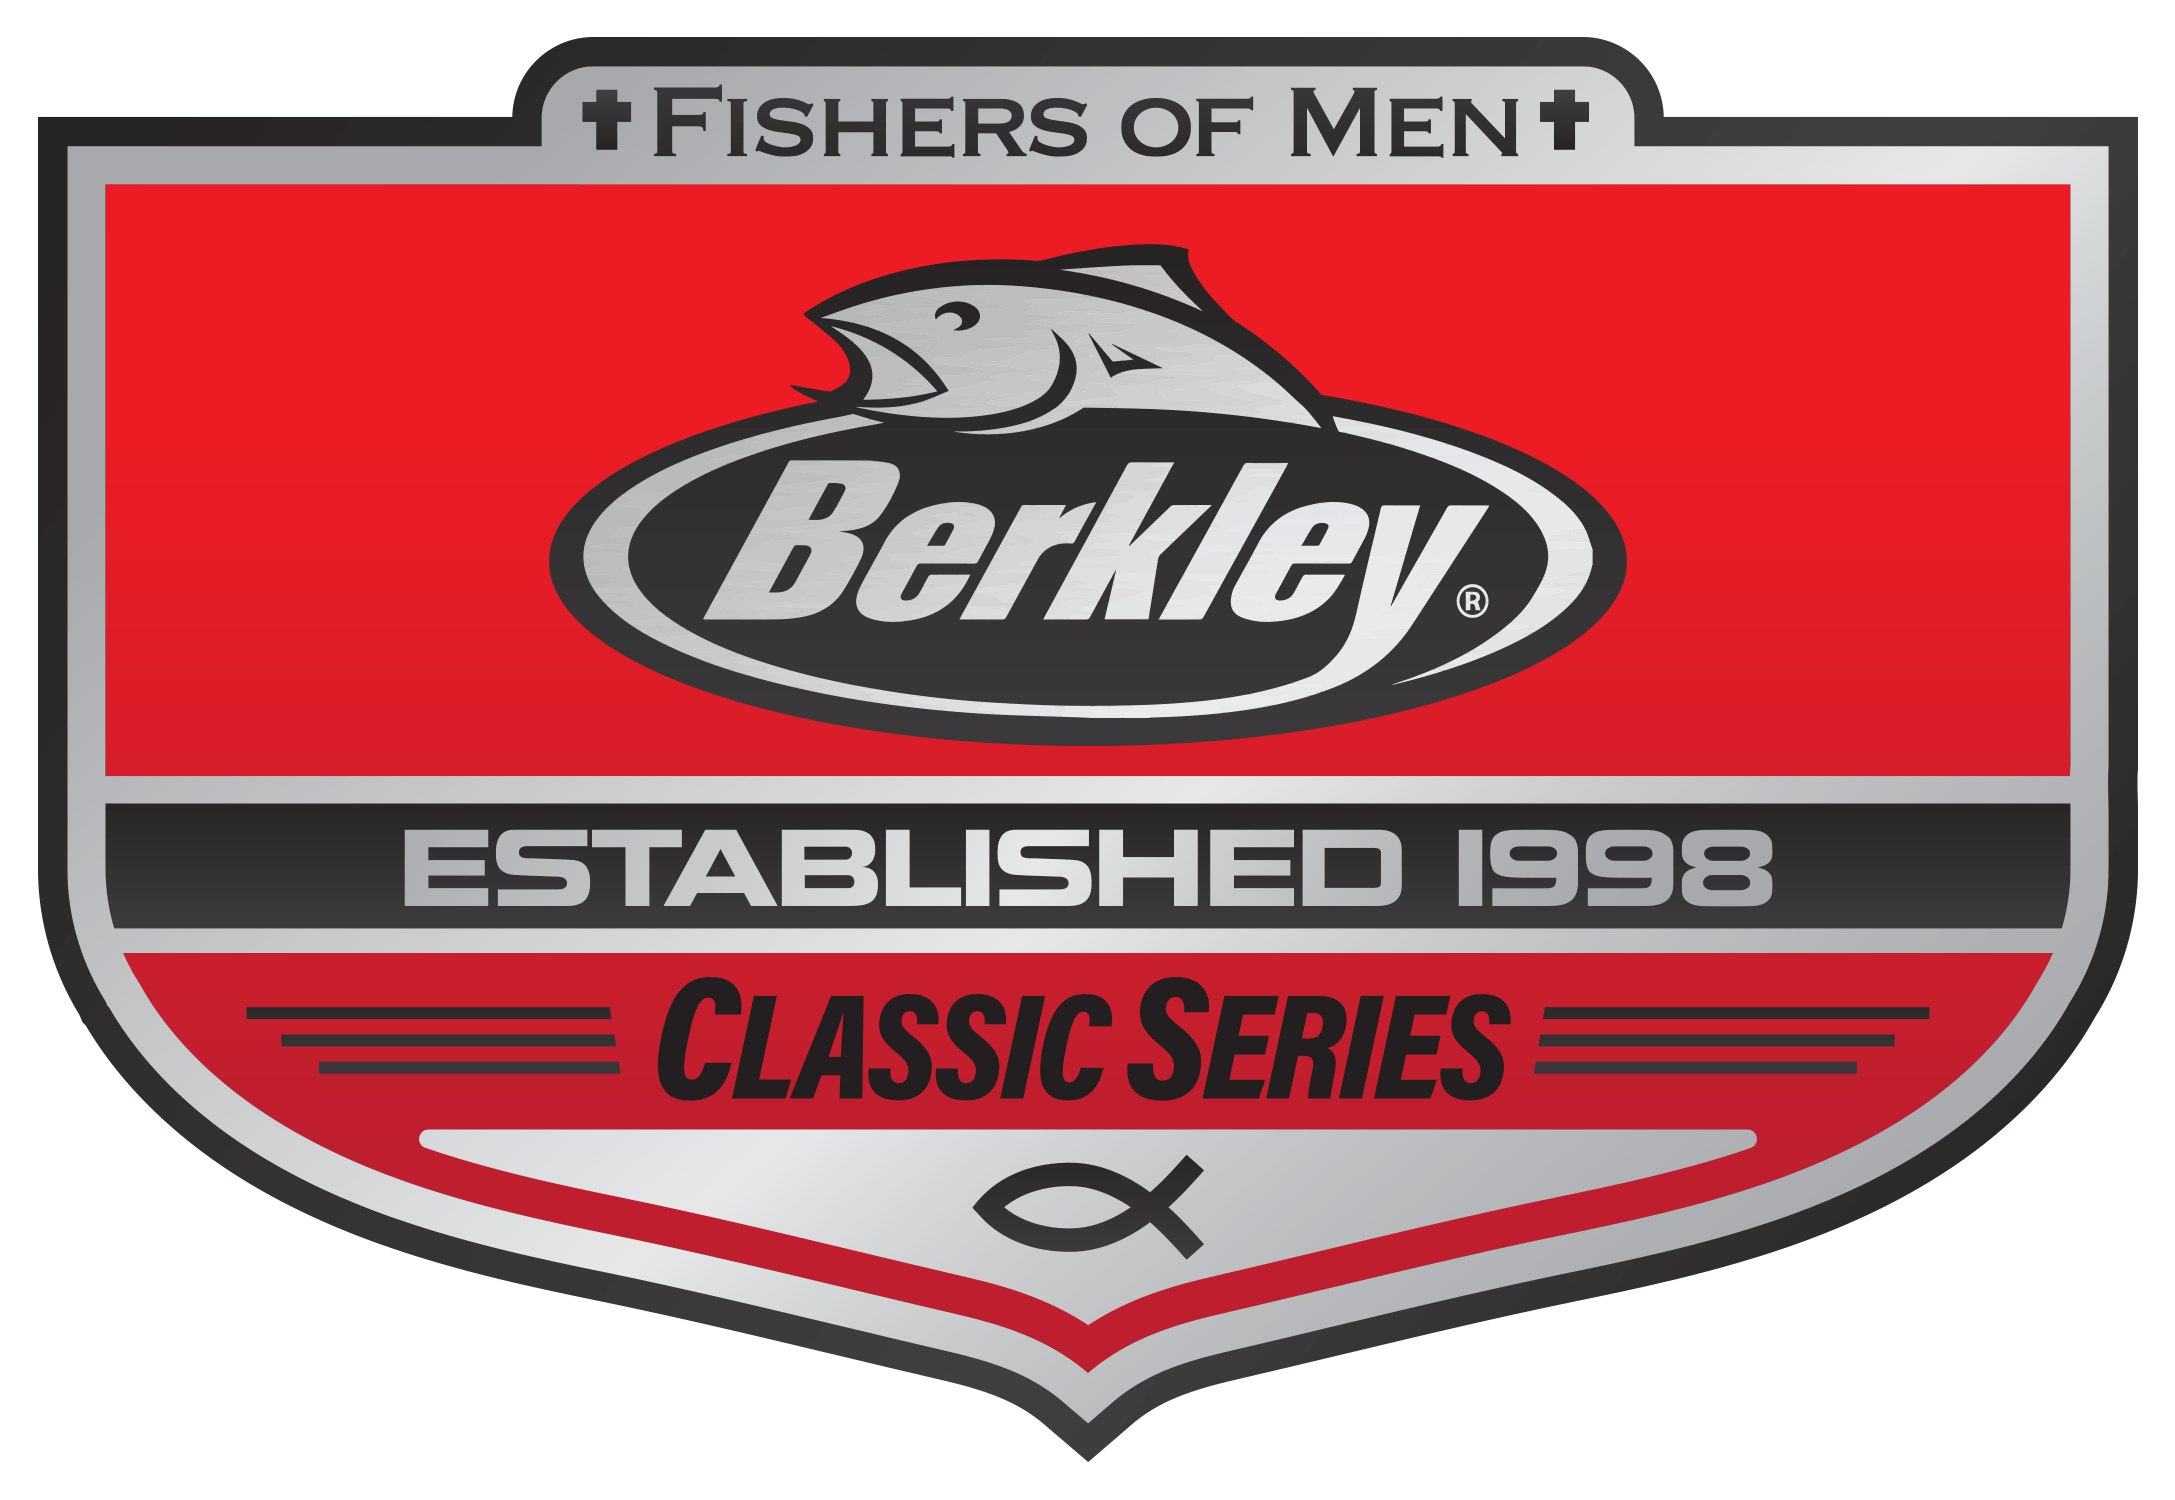 Fishers of Men National Tournament Trail